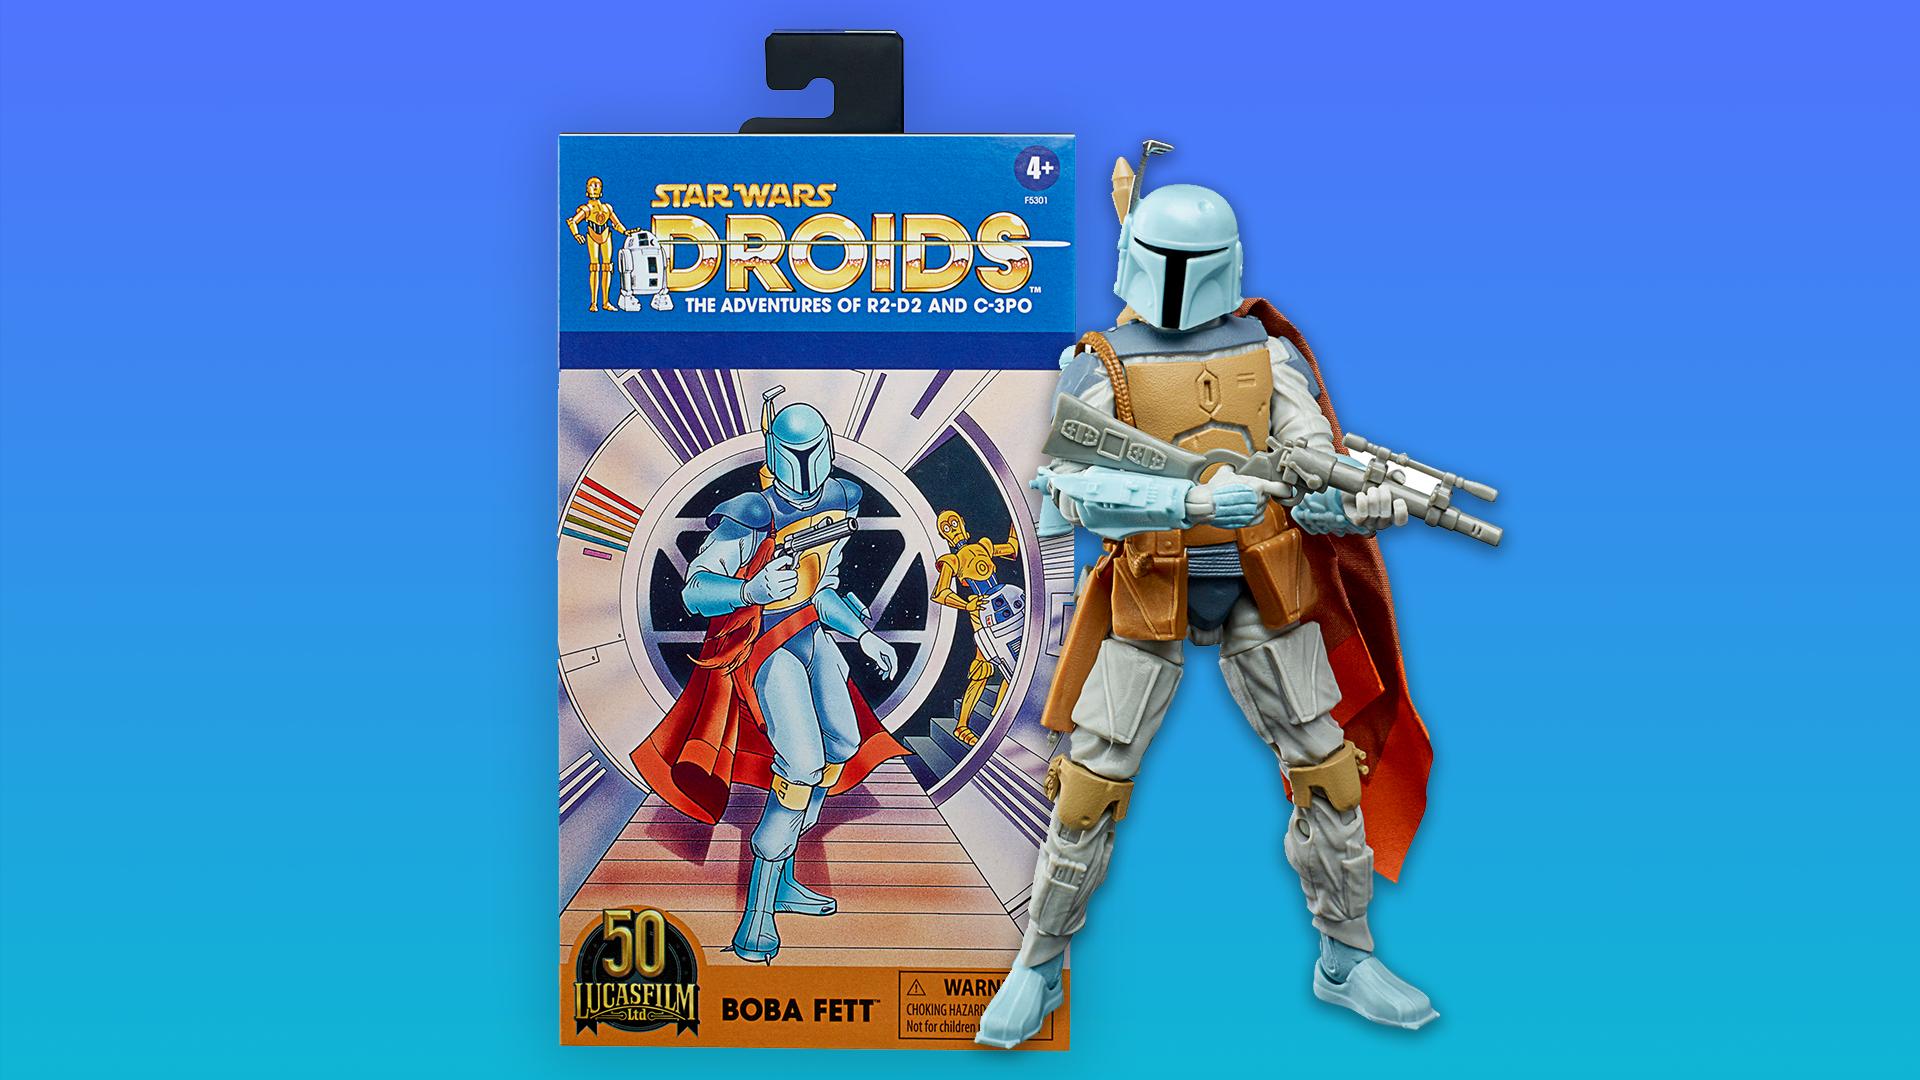 New Hasbro Star Wars Figures Inspired by 'Star Wars: Droids' Revealed -  Star Wars News Net